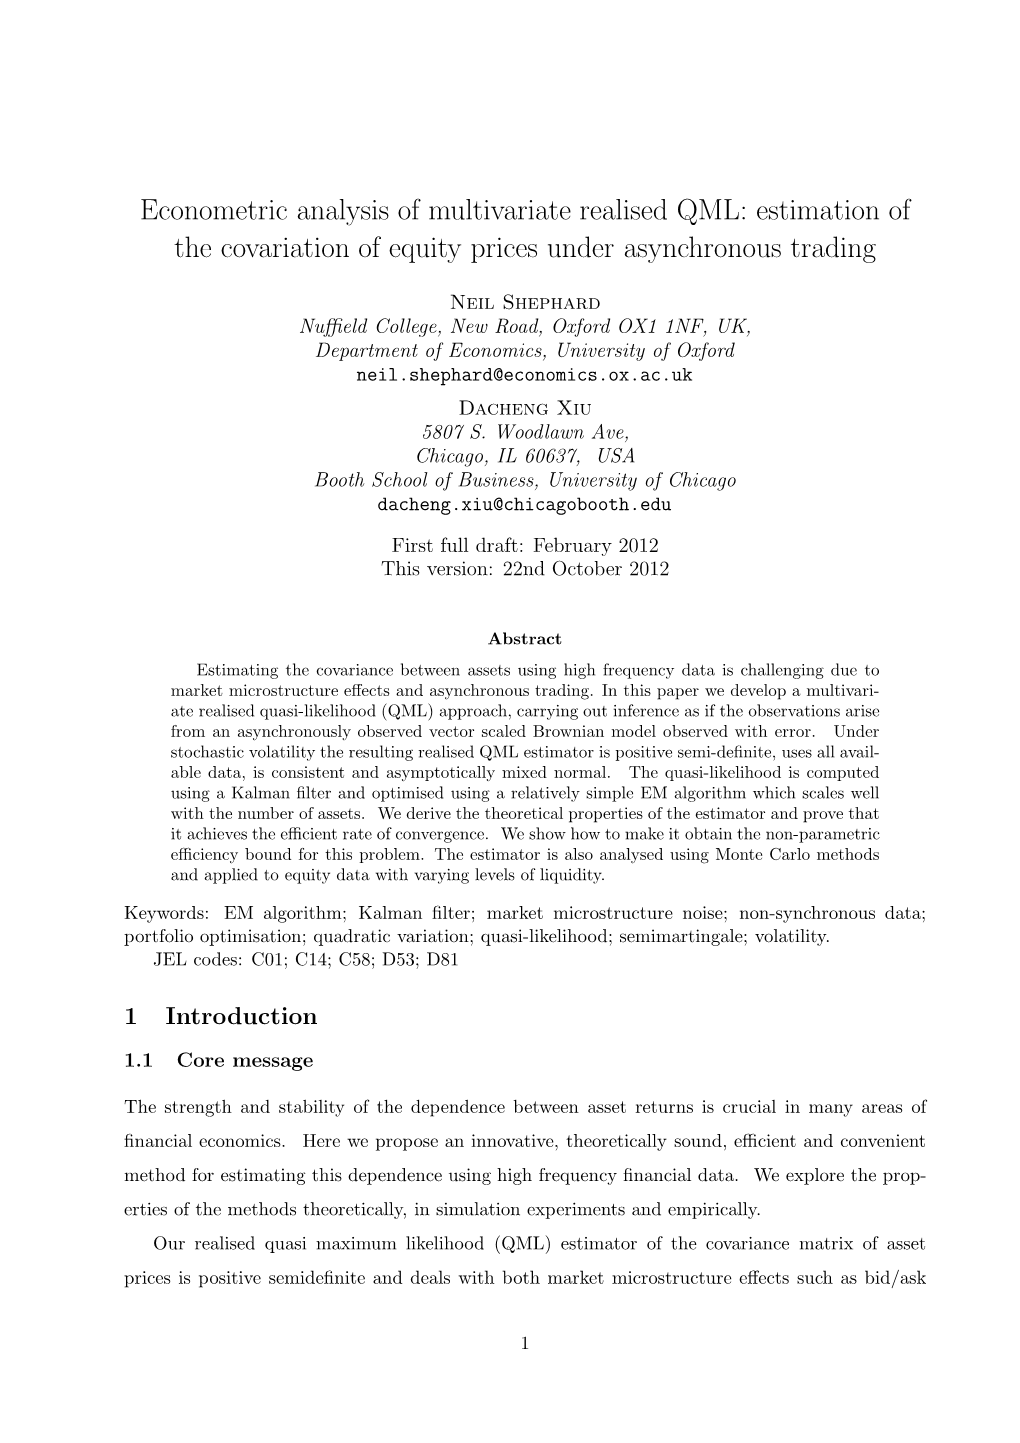 Econometric Analysis of Multivariate Realised QML: Estimation of the Covariation of Equity Prices Under Asynchronous Trading